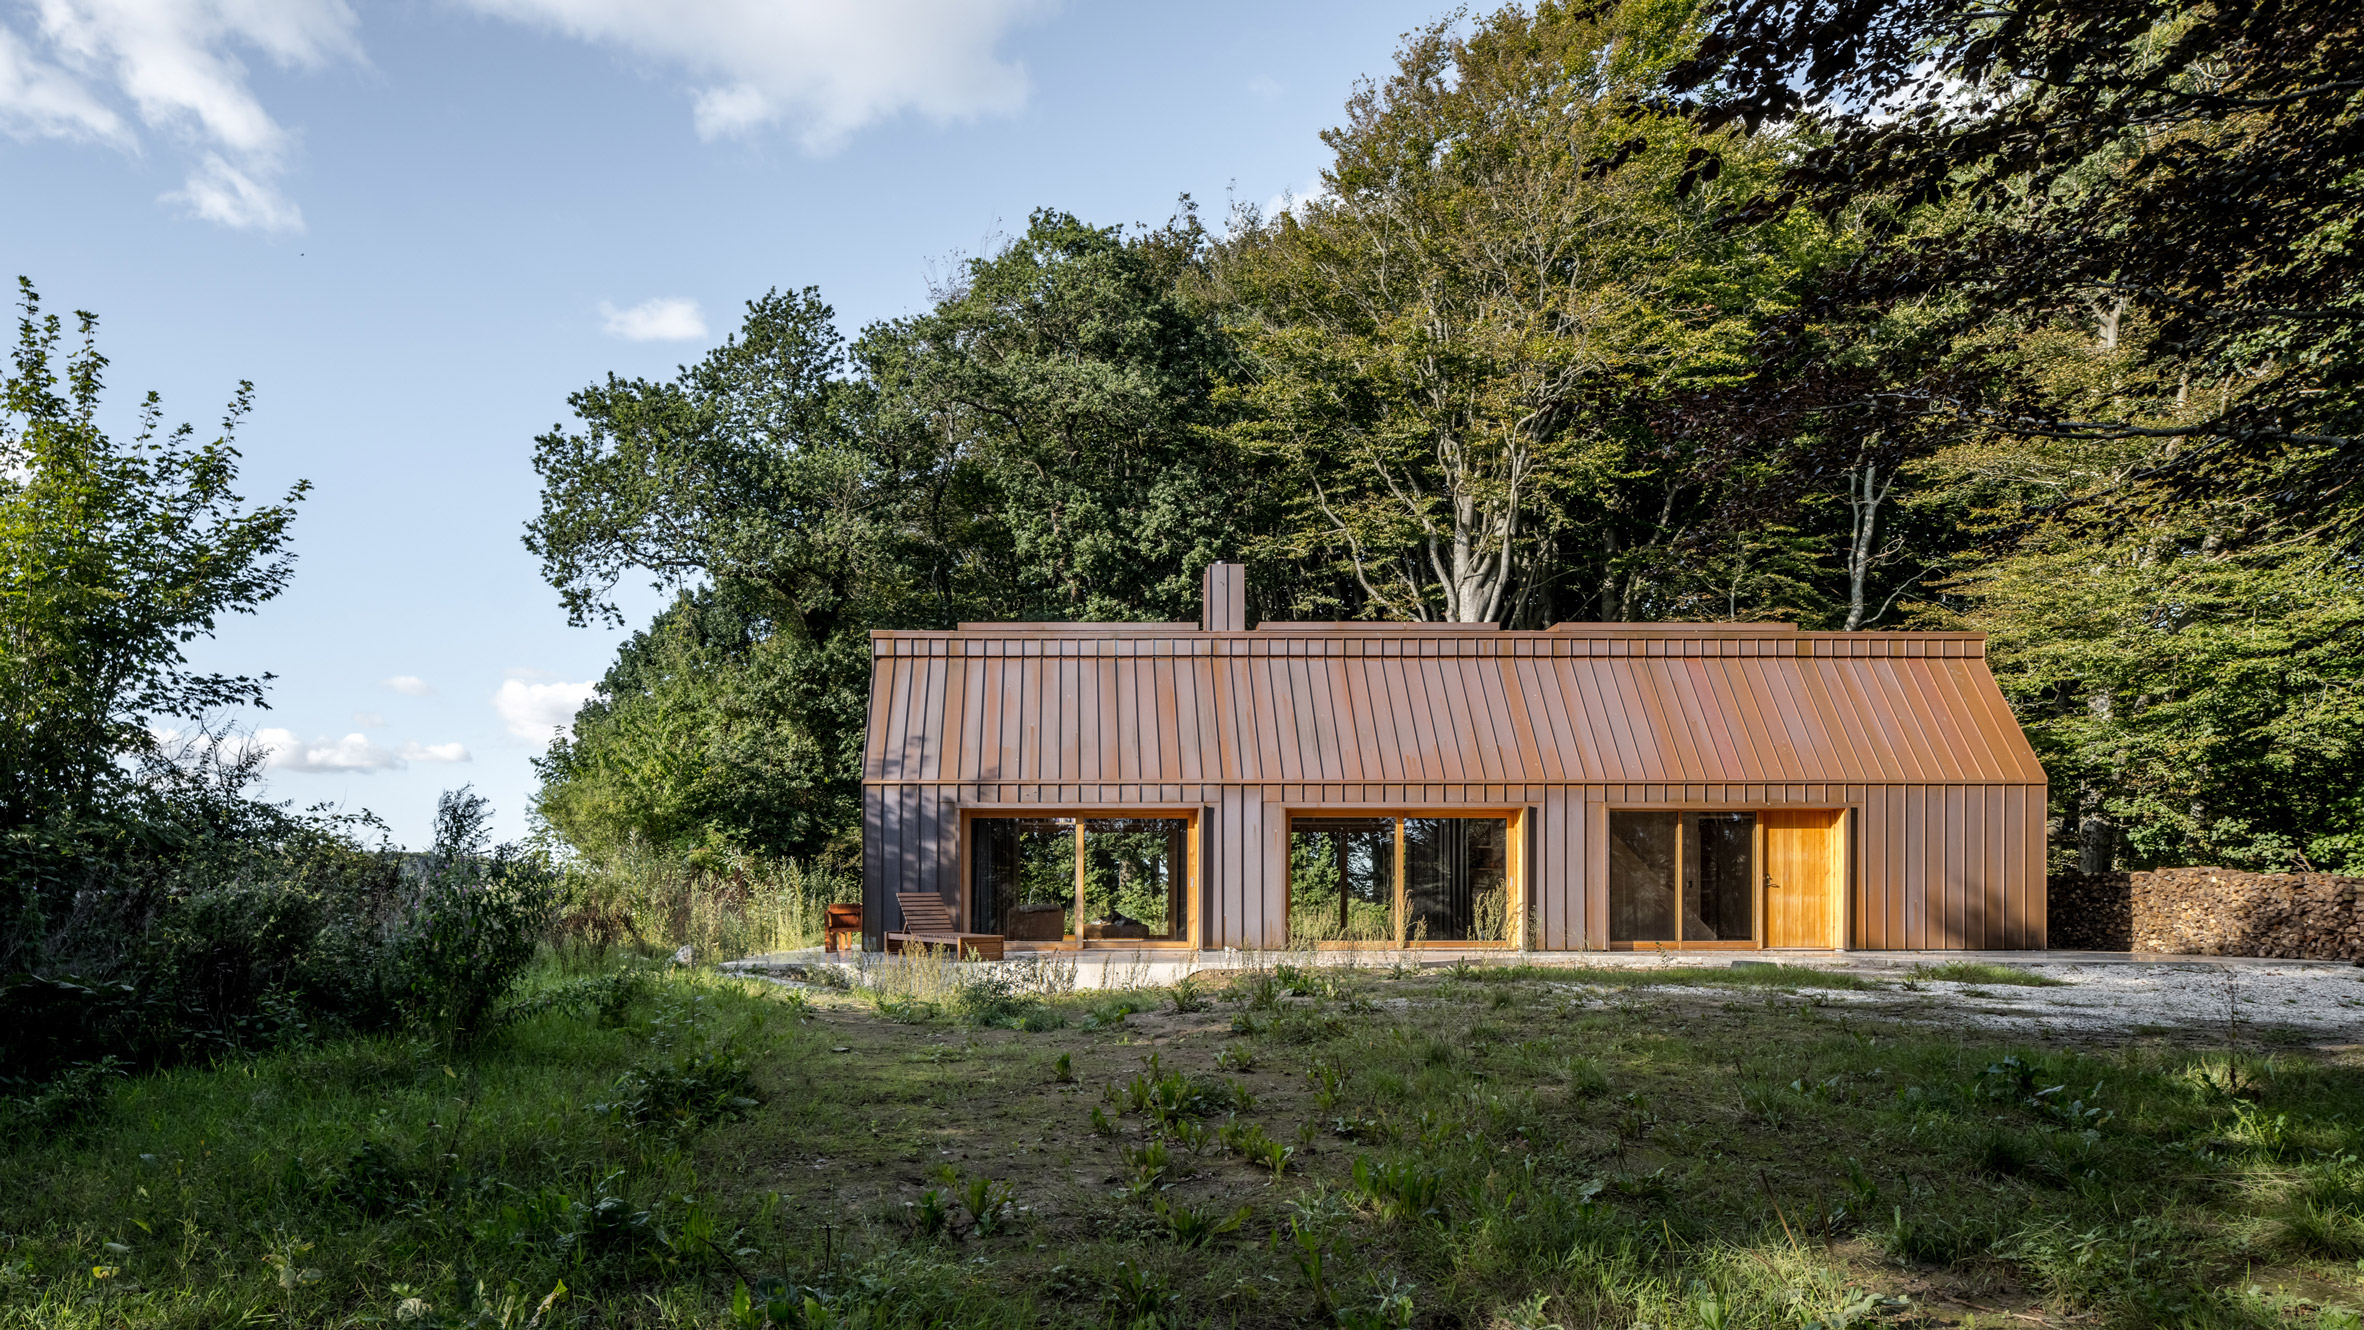 The Author's House is a copper-clad cabin in a Danish forest